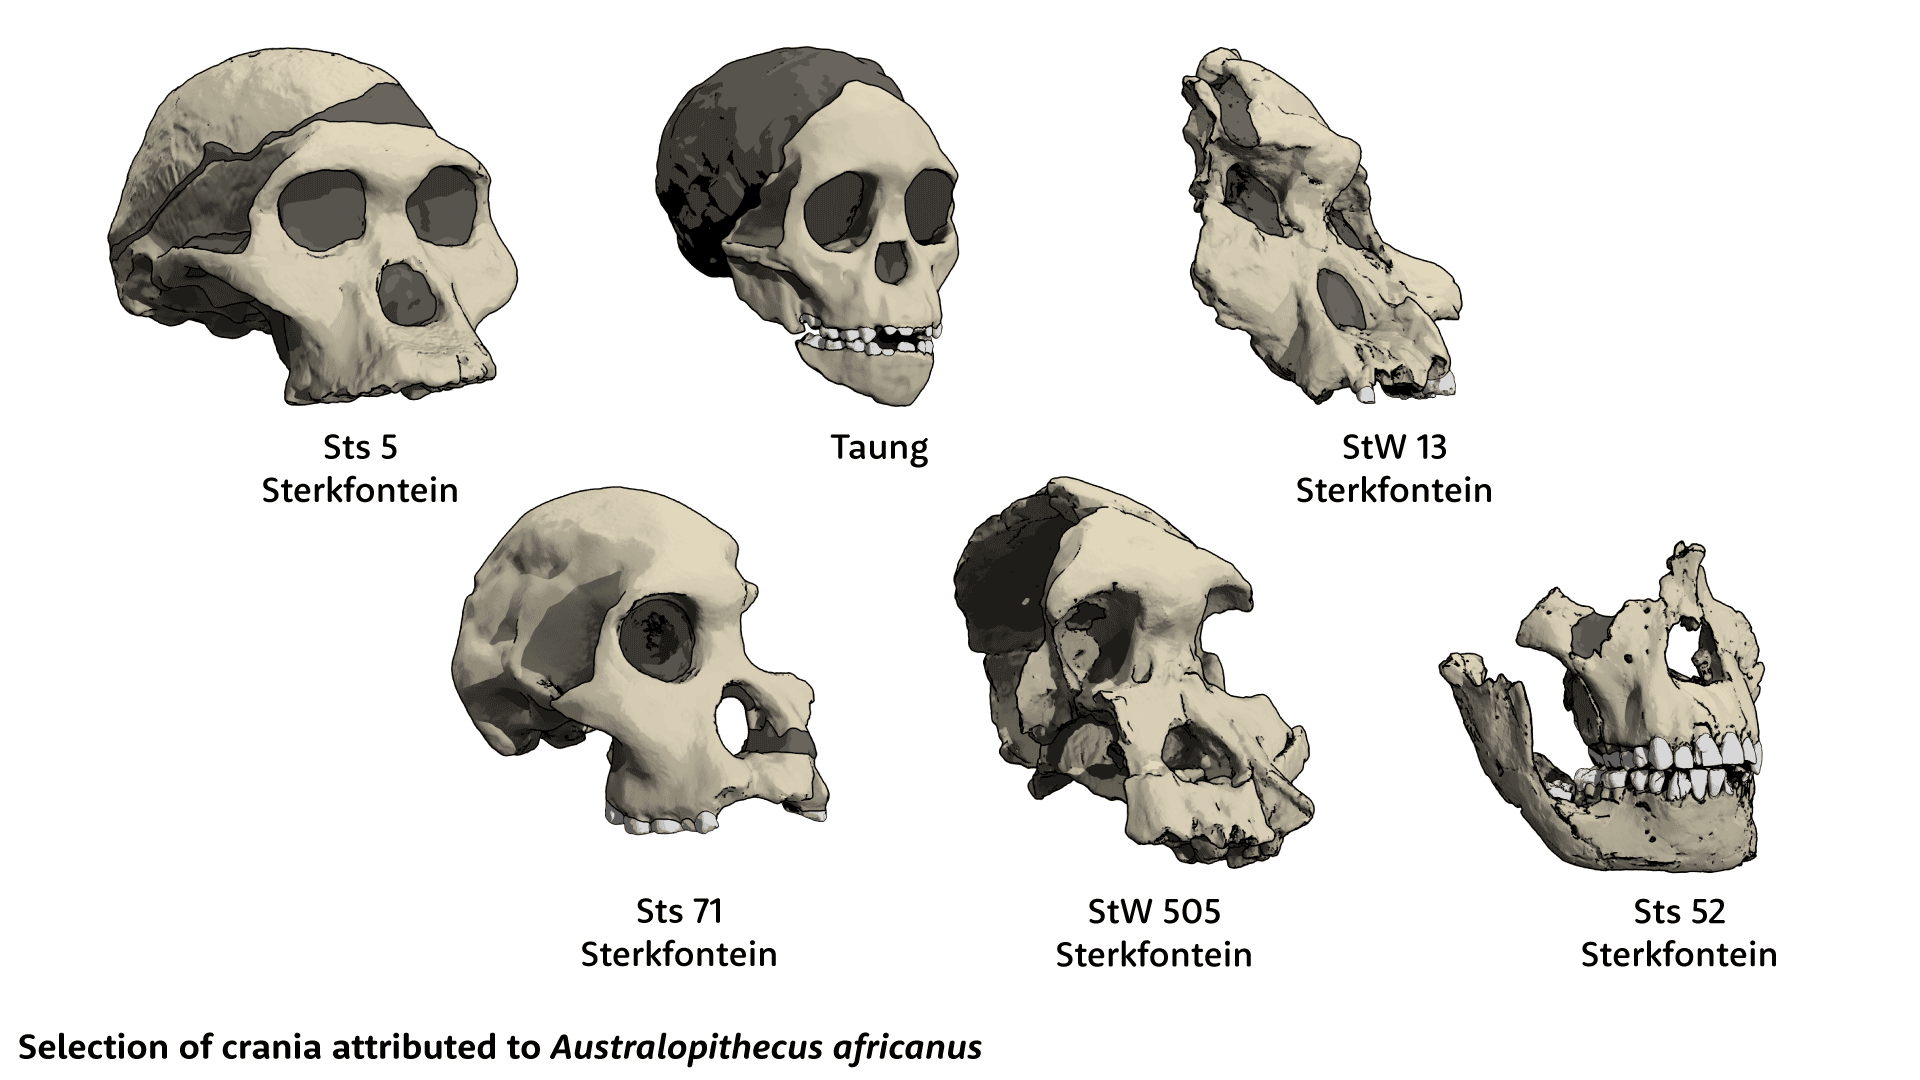 Six skulls attributed to Australopithecus africanus. From top left, Sts 5, Taung, StW 13, Sts 71, StW 505, and Sts 52